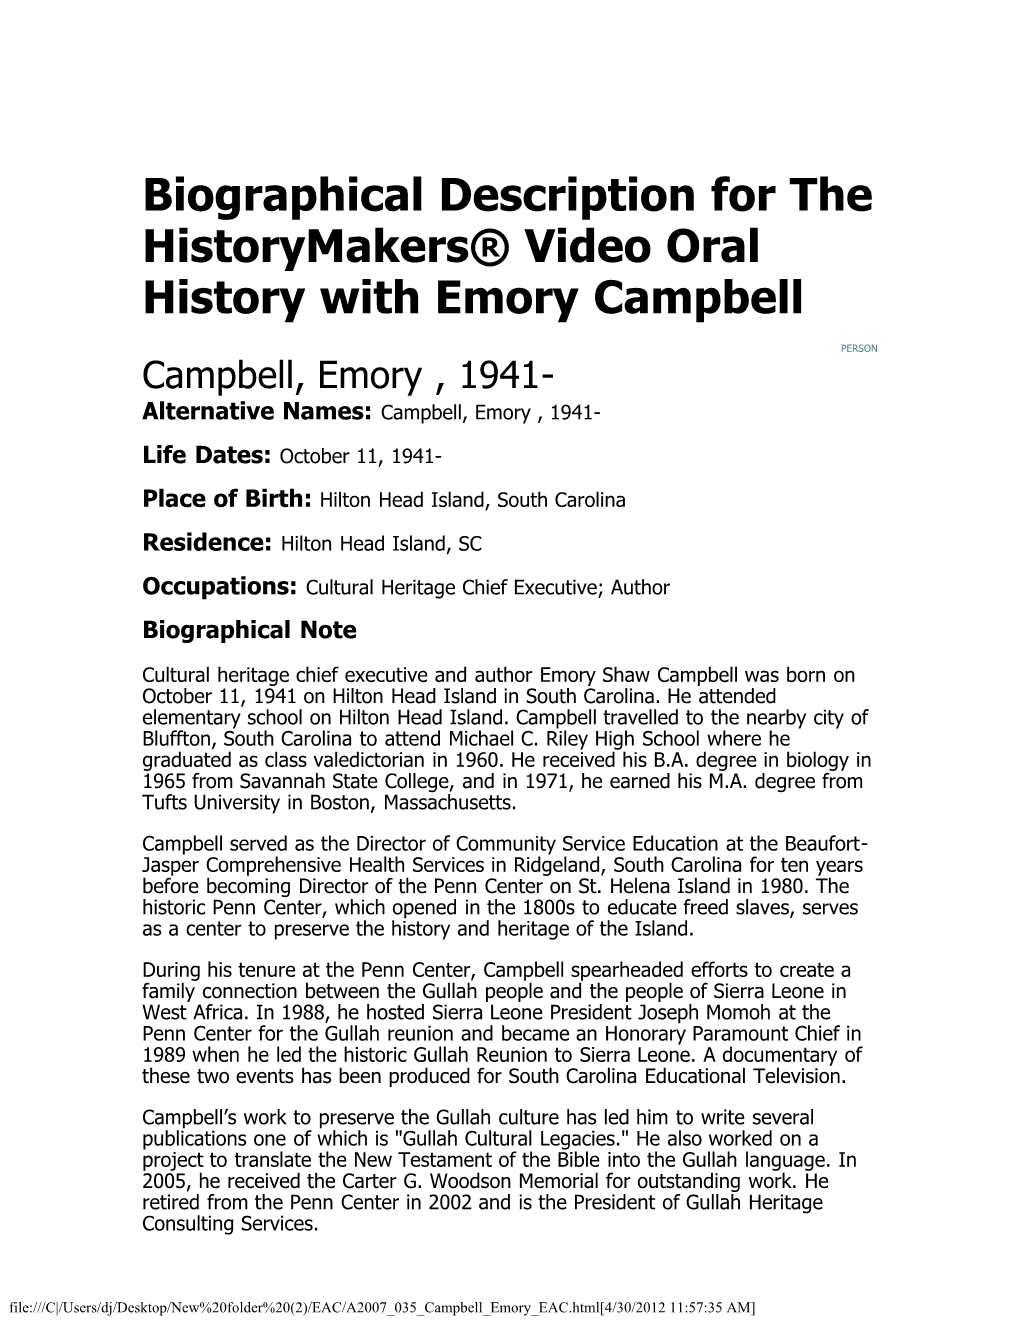 Biographical Description for the Historymakers® Video Oral History with Emory Campbell